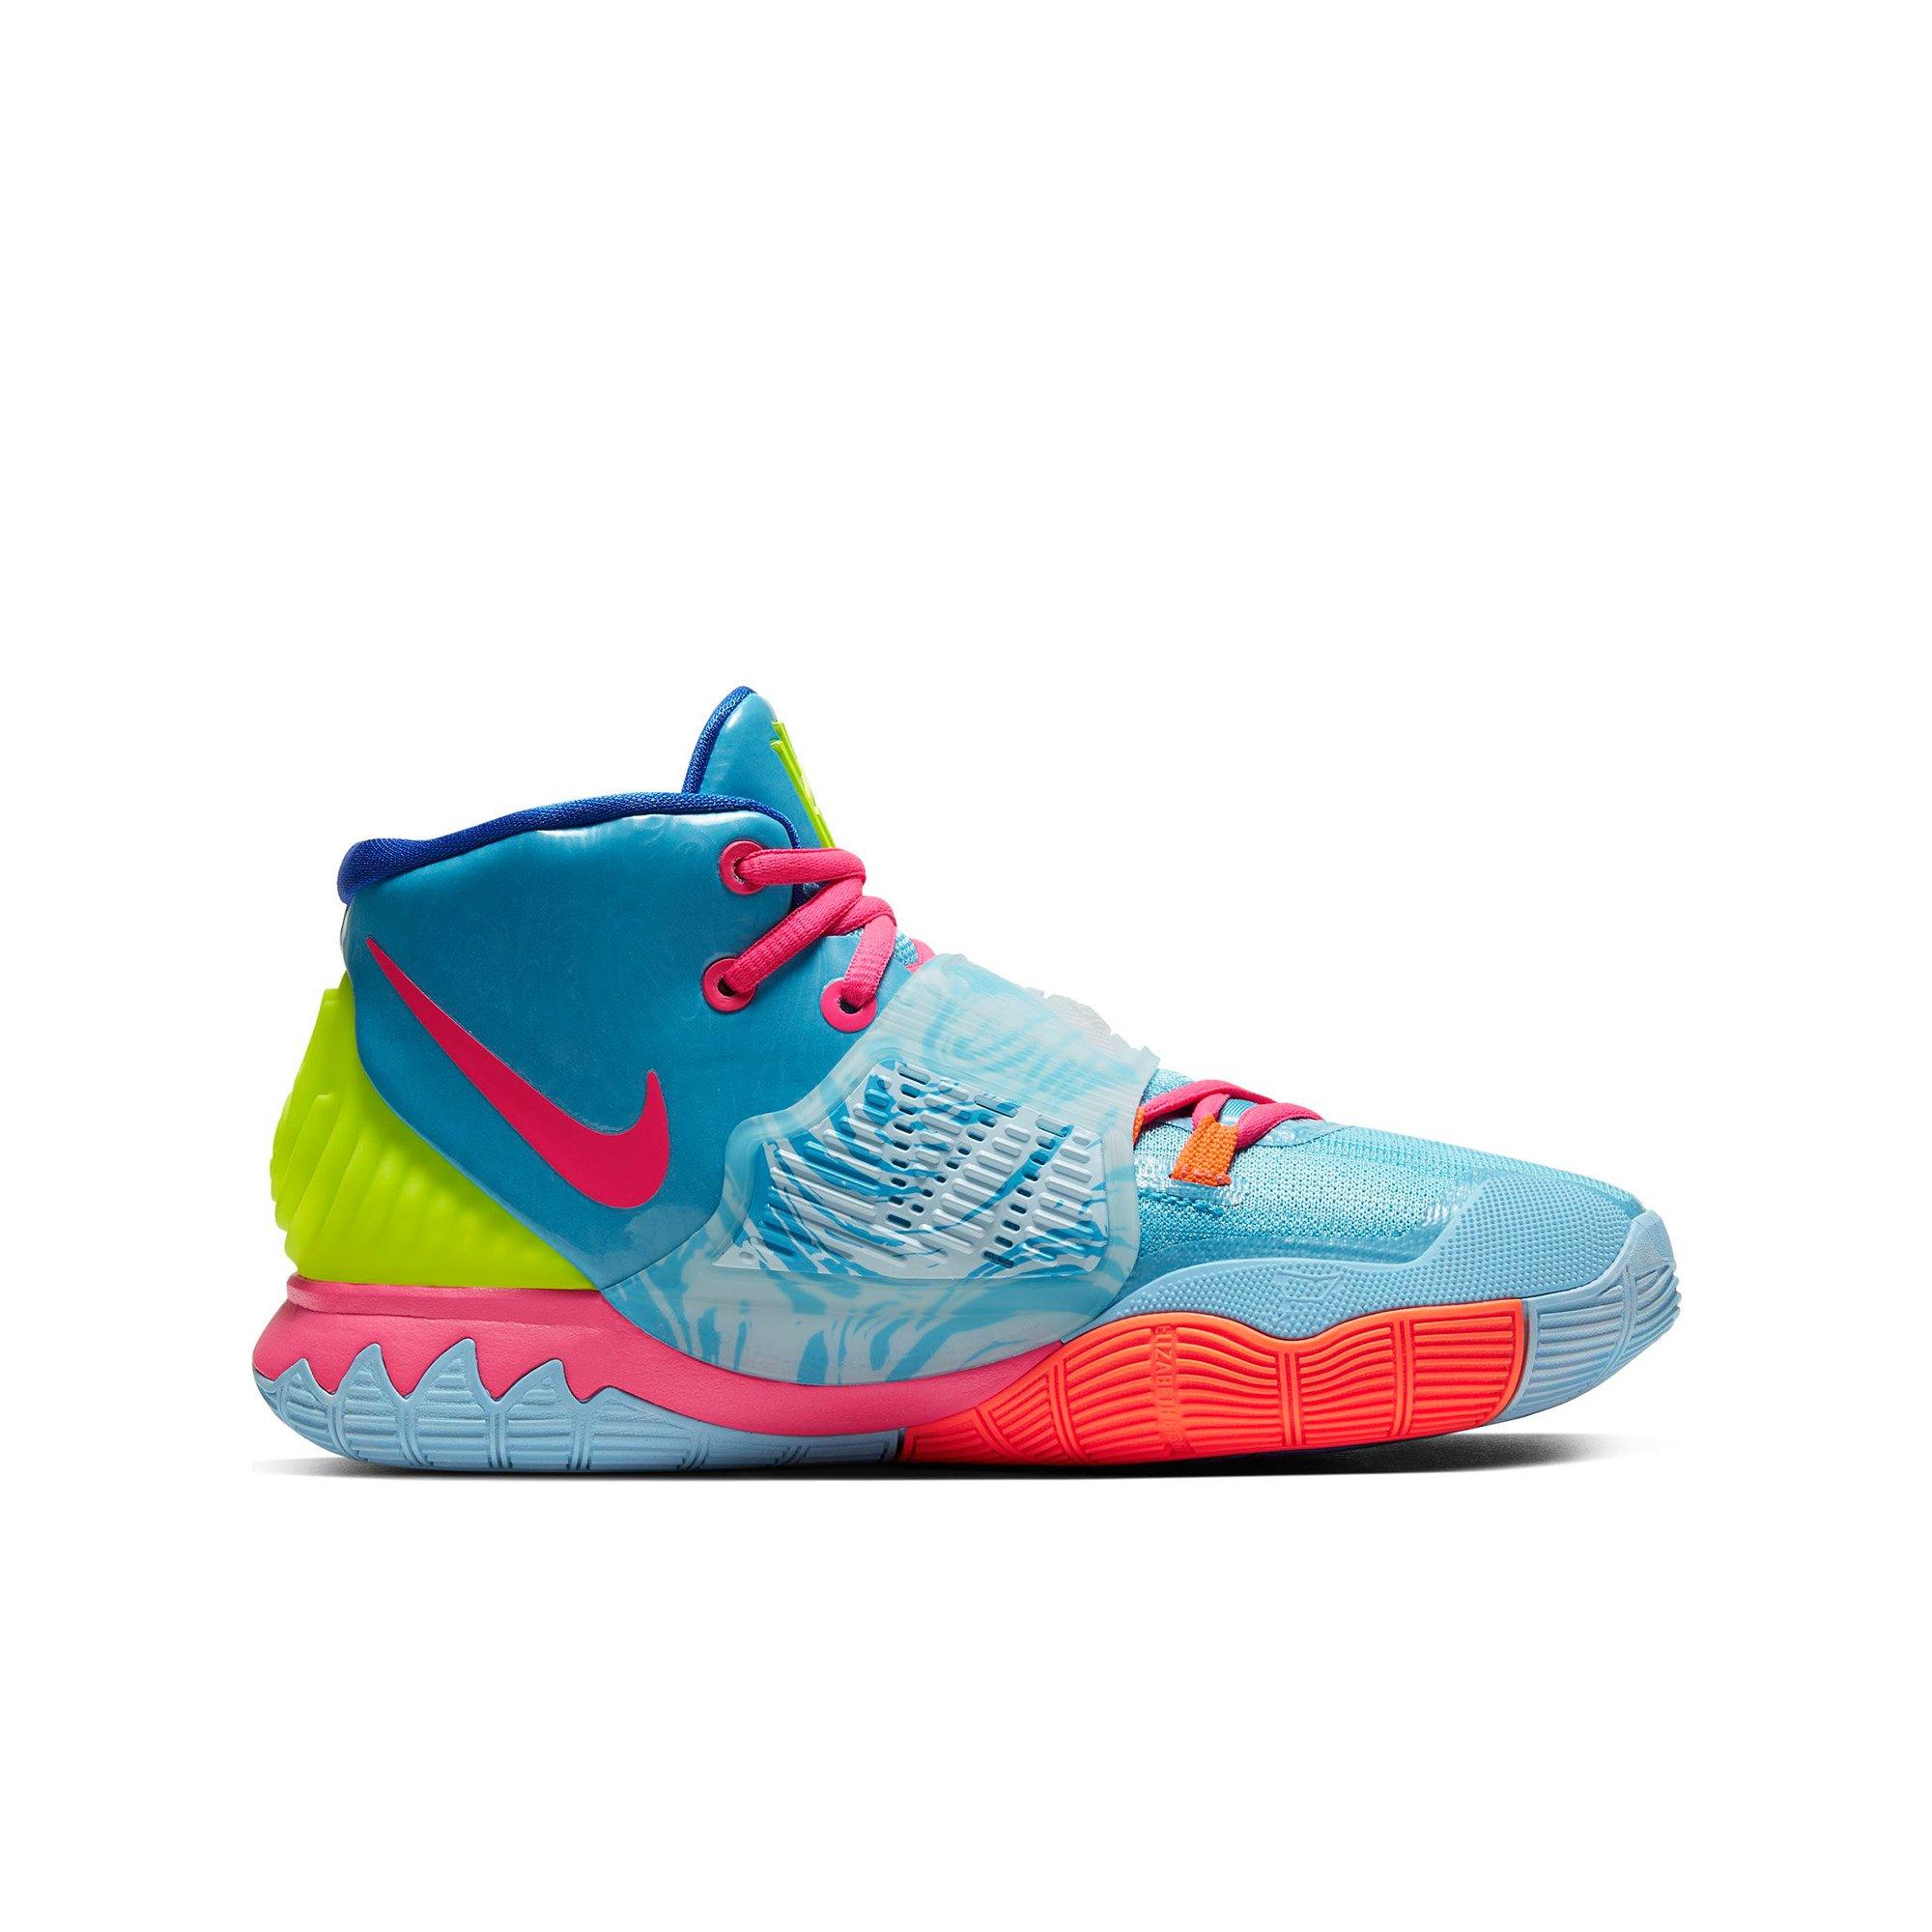 kyrie irving basketball shoes for kids